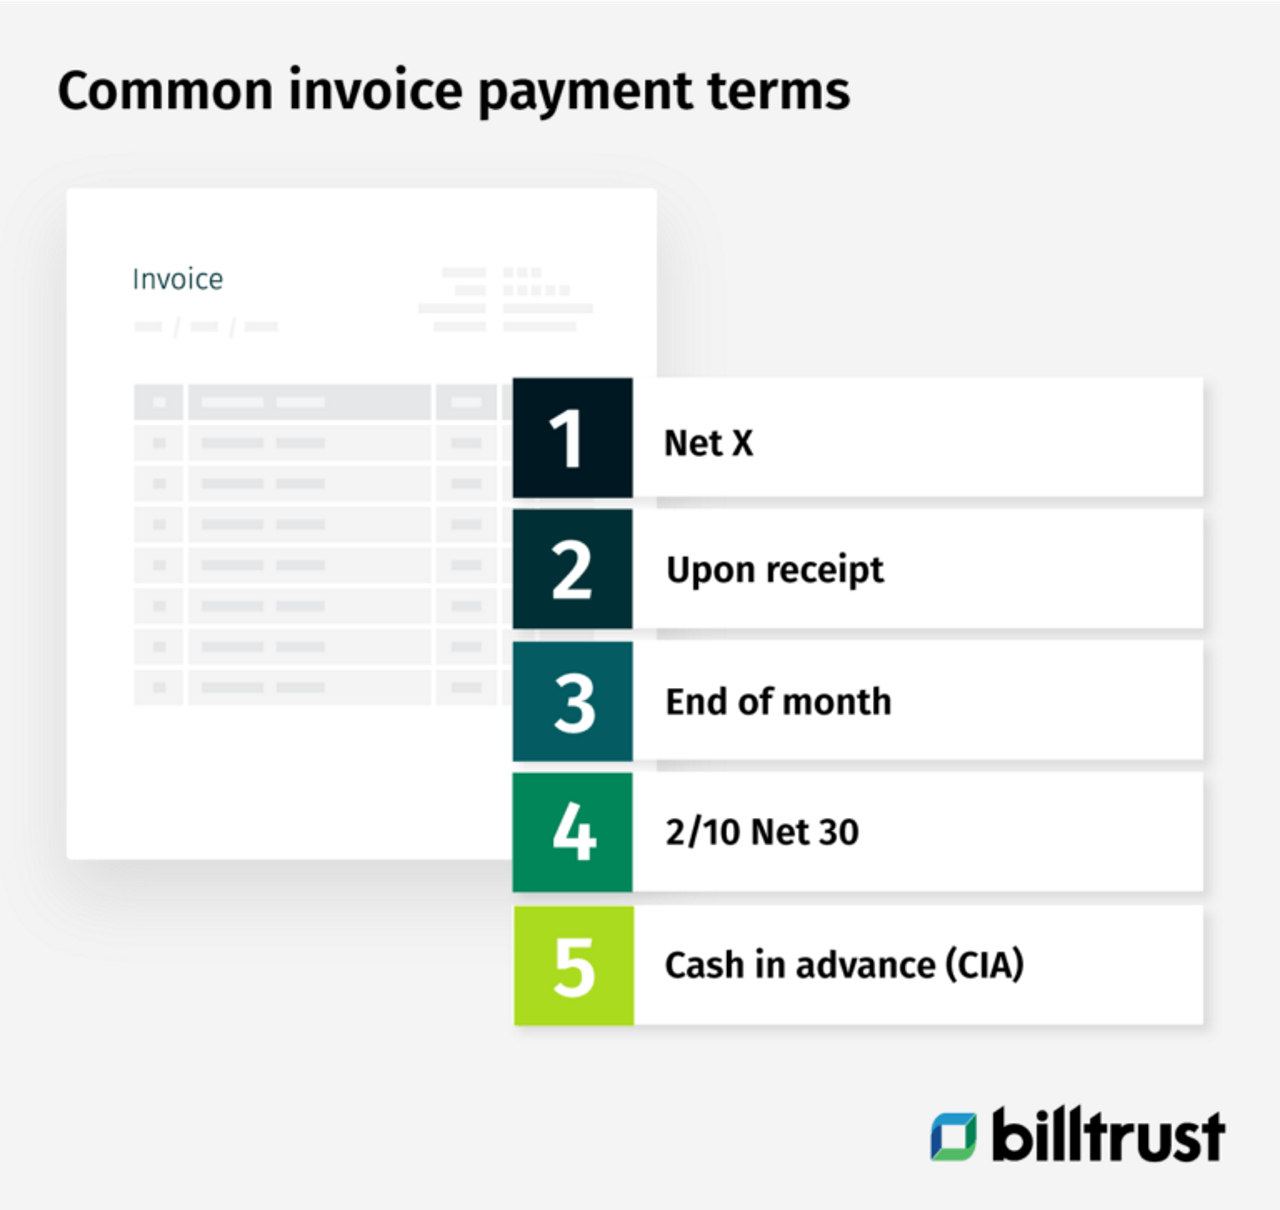 common invoice payment terms: Next X, upon receipt, end of month, 2/10 Net 30 and cash in advance